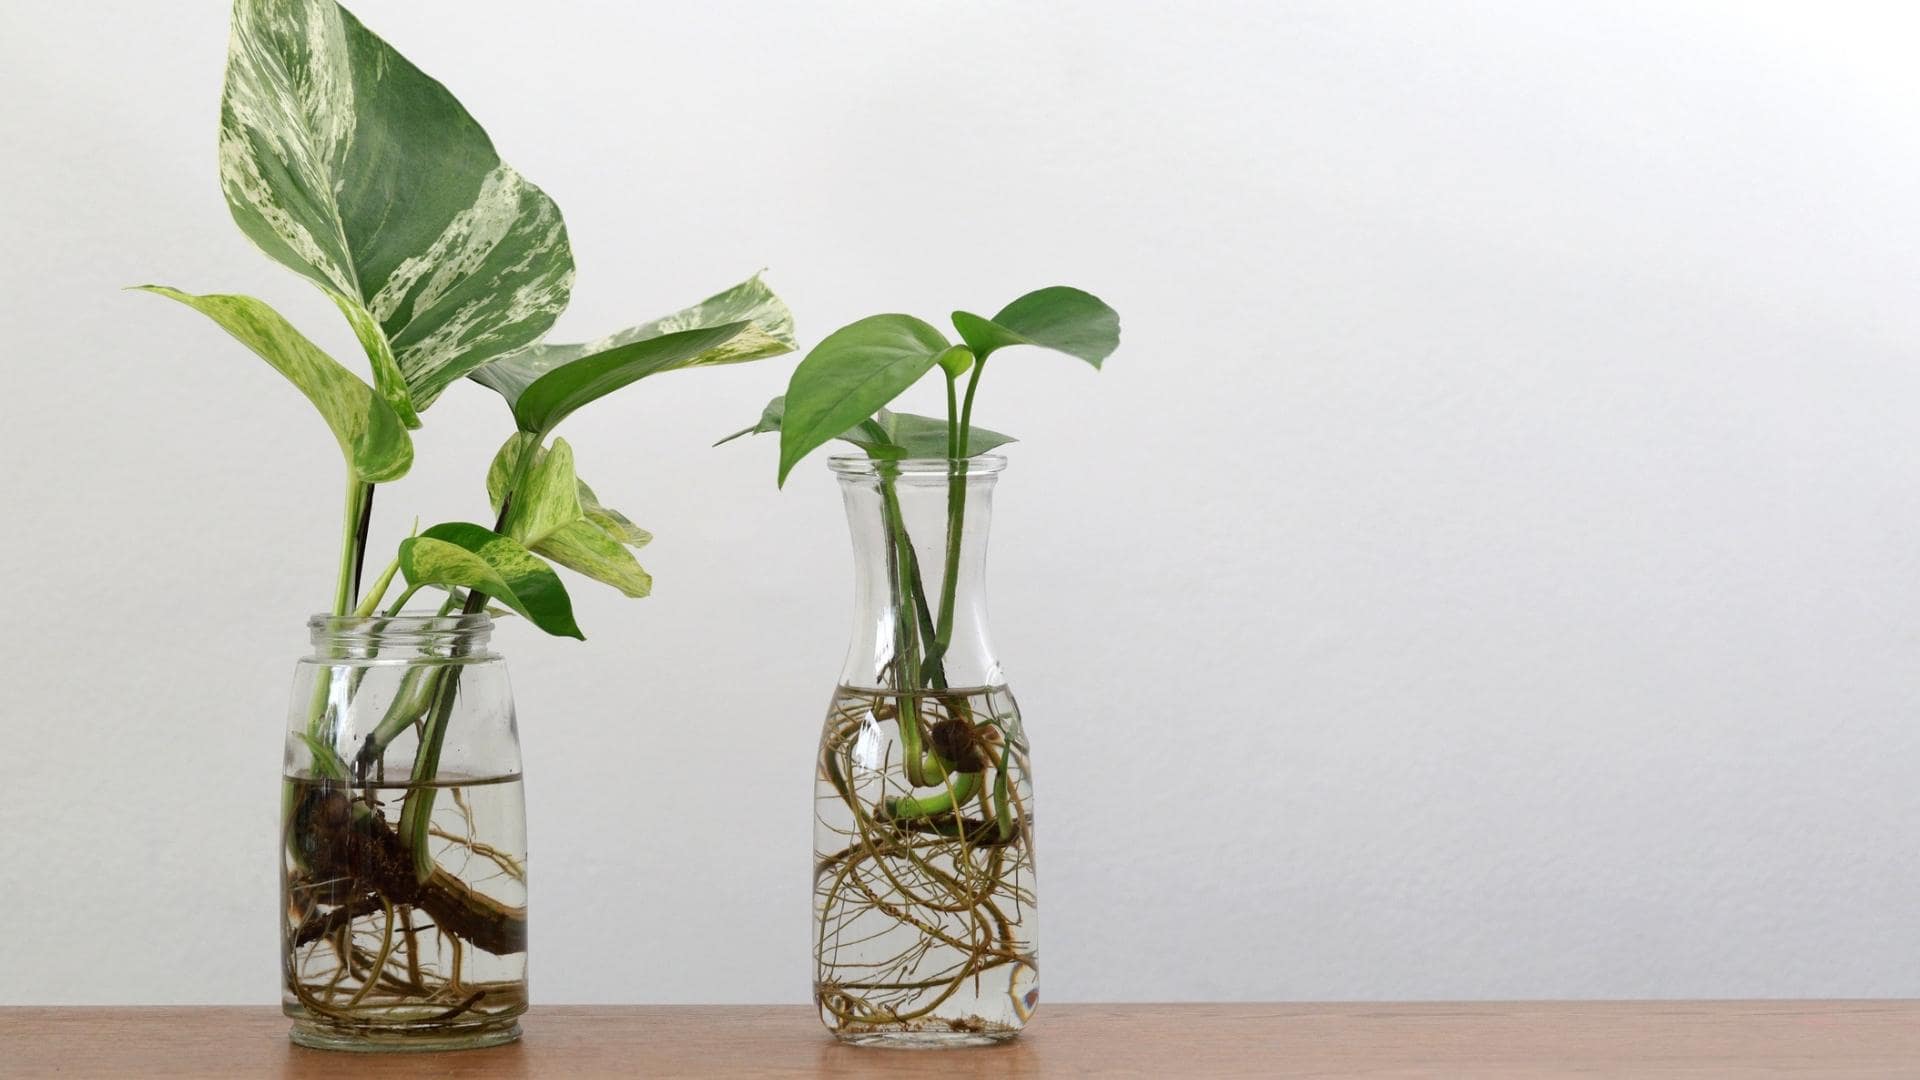 Two clear jars on a wooden table filled with water and pothos plant cuttings. They are positioned in front of a white wall.